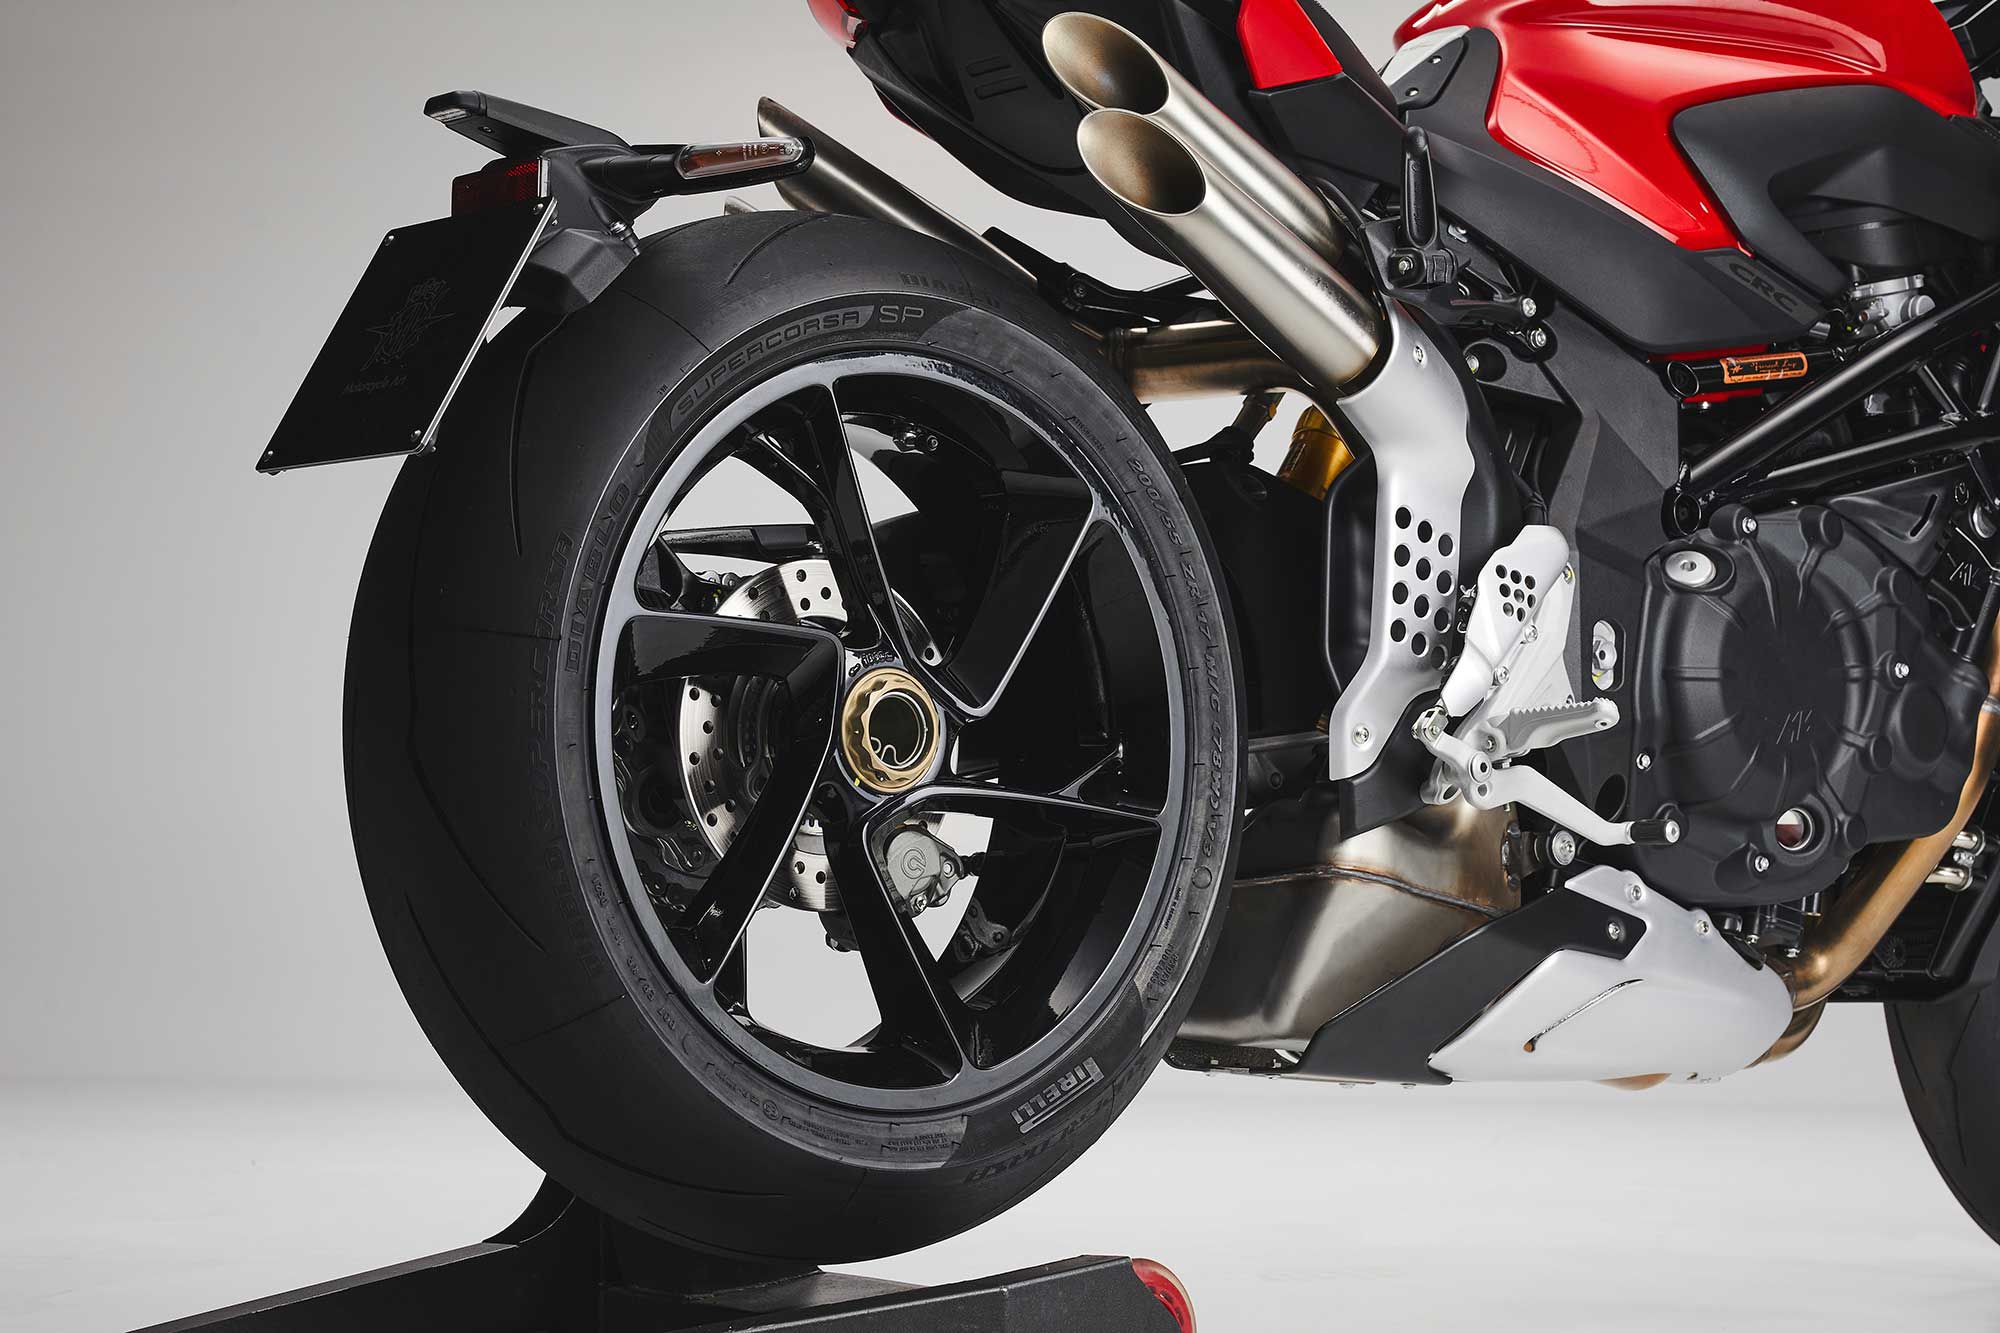 The RS has the same single-sided swingarm as the RR.